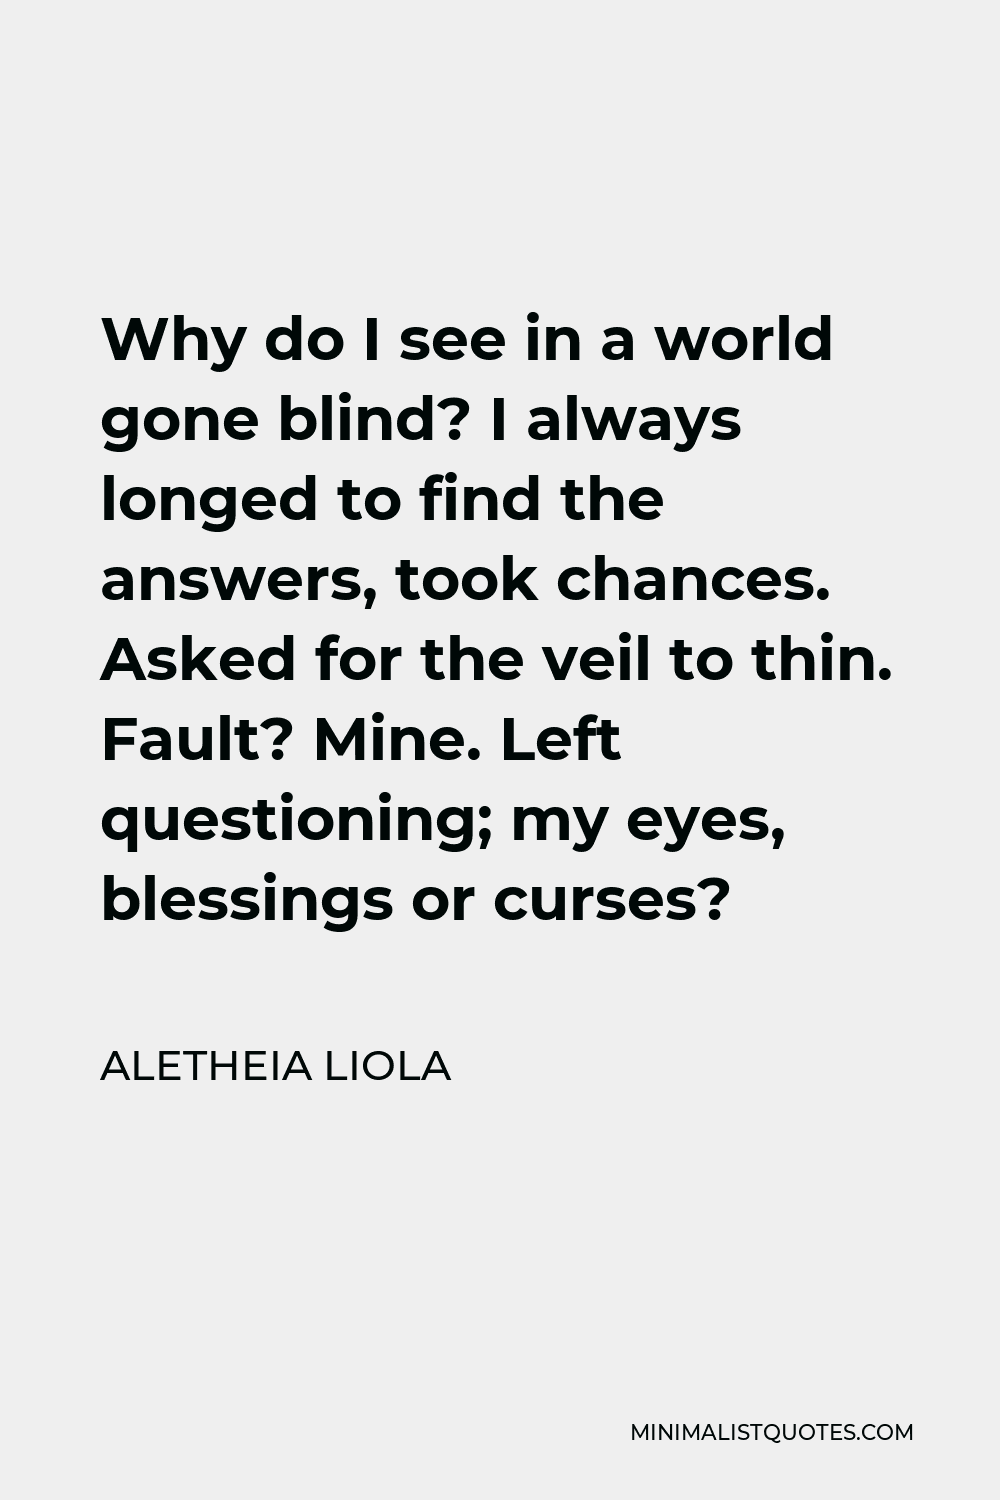 Aletheia Liola Quote - Why do I see in a world gone blind? I always longed to find the answers, took chances. Asked for the veil to thin. Fault? Mine. Left questioning; my eyes, blessings or curses?